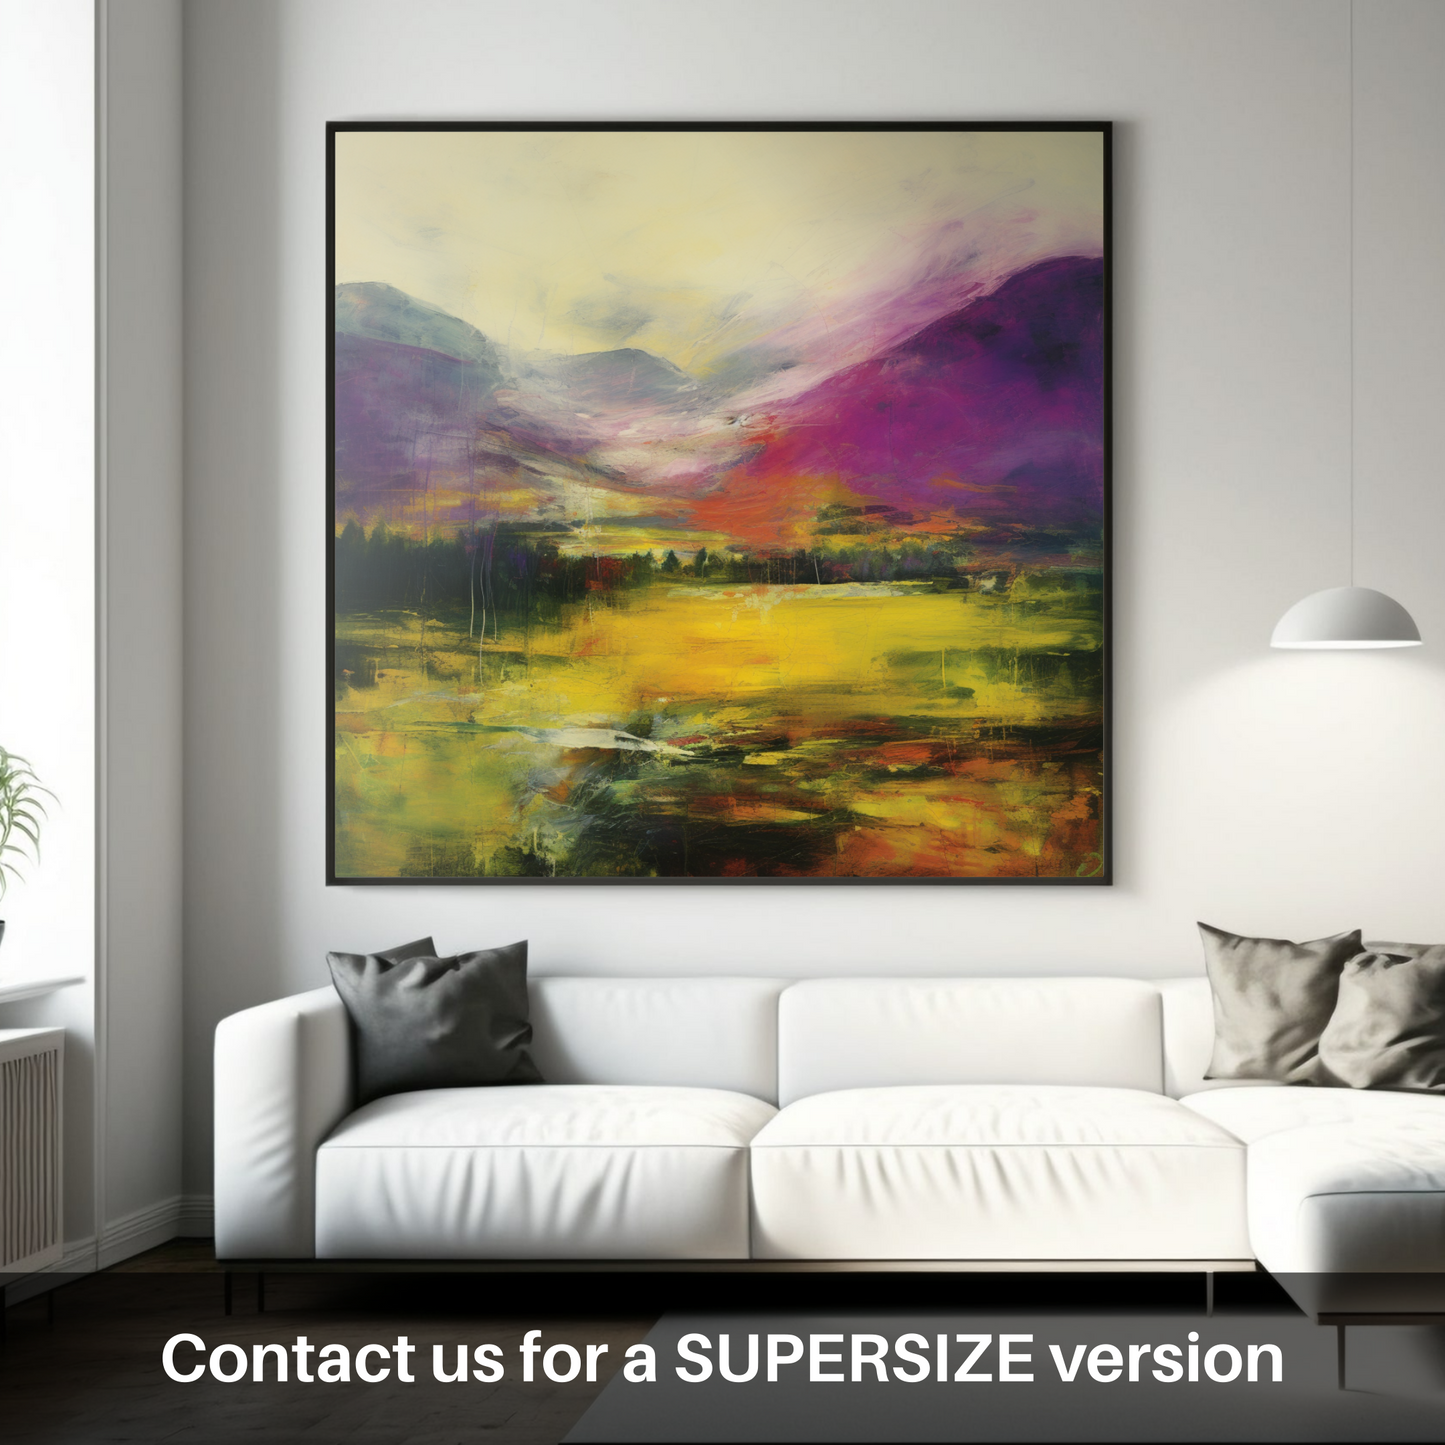 Huge supersize print of Glen Orchy, Argyll and Bute